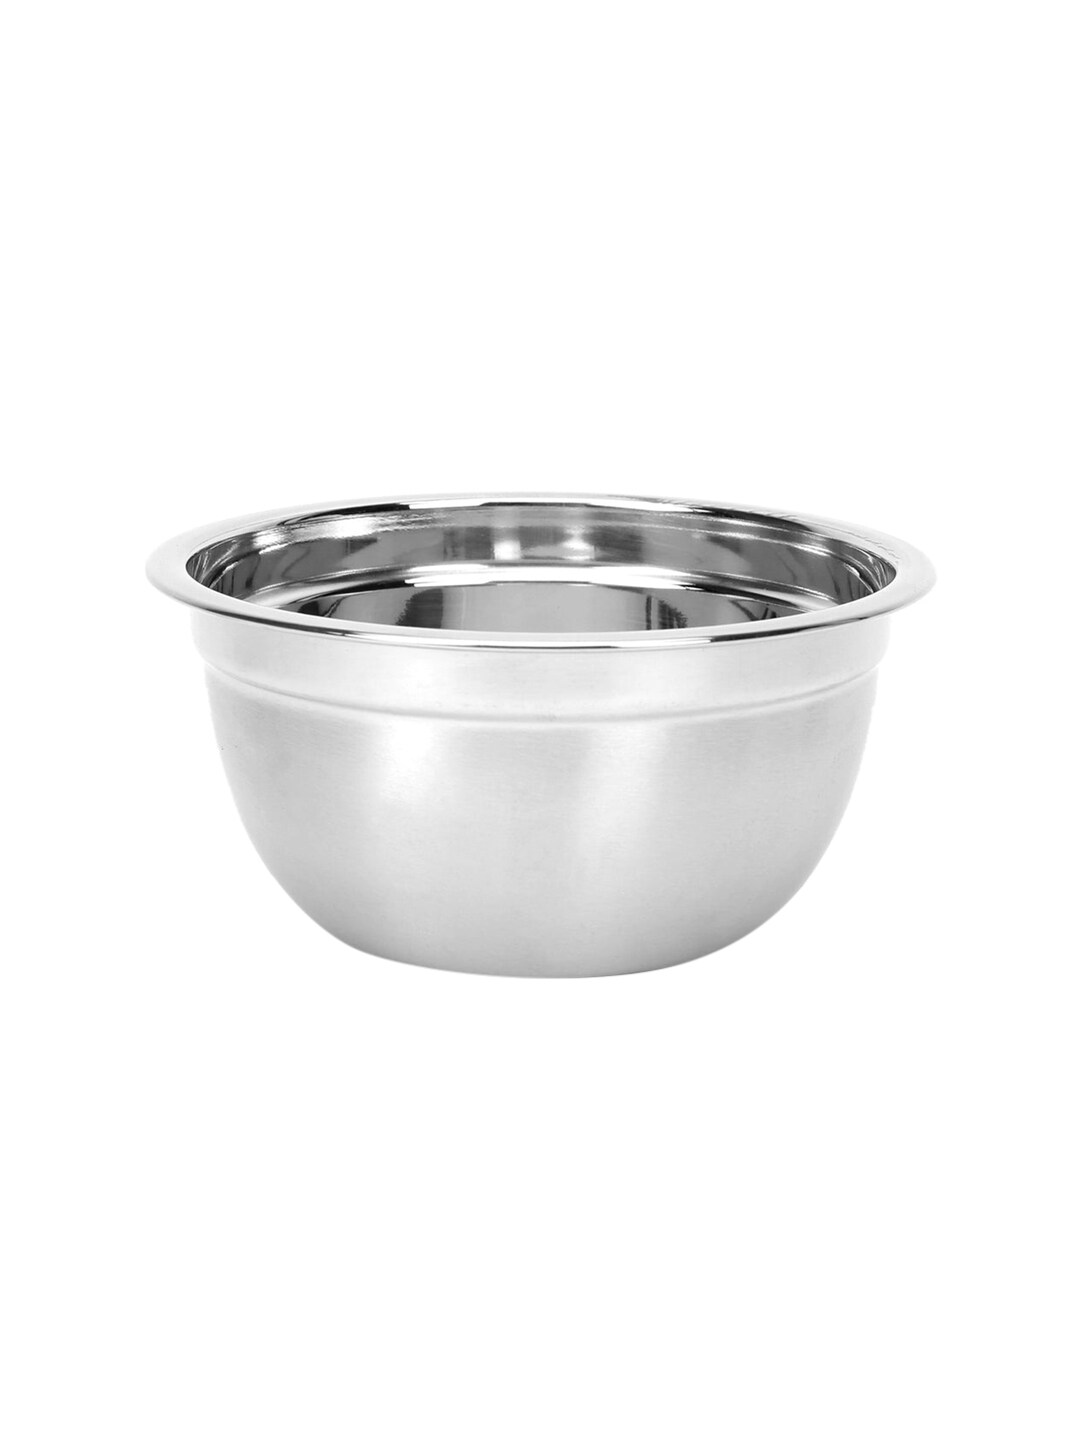 Athome by Nilkamal Steel Toned Stainless Steel Mixing Bowl Price in India